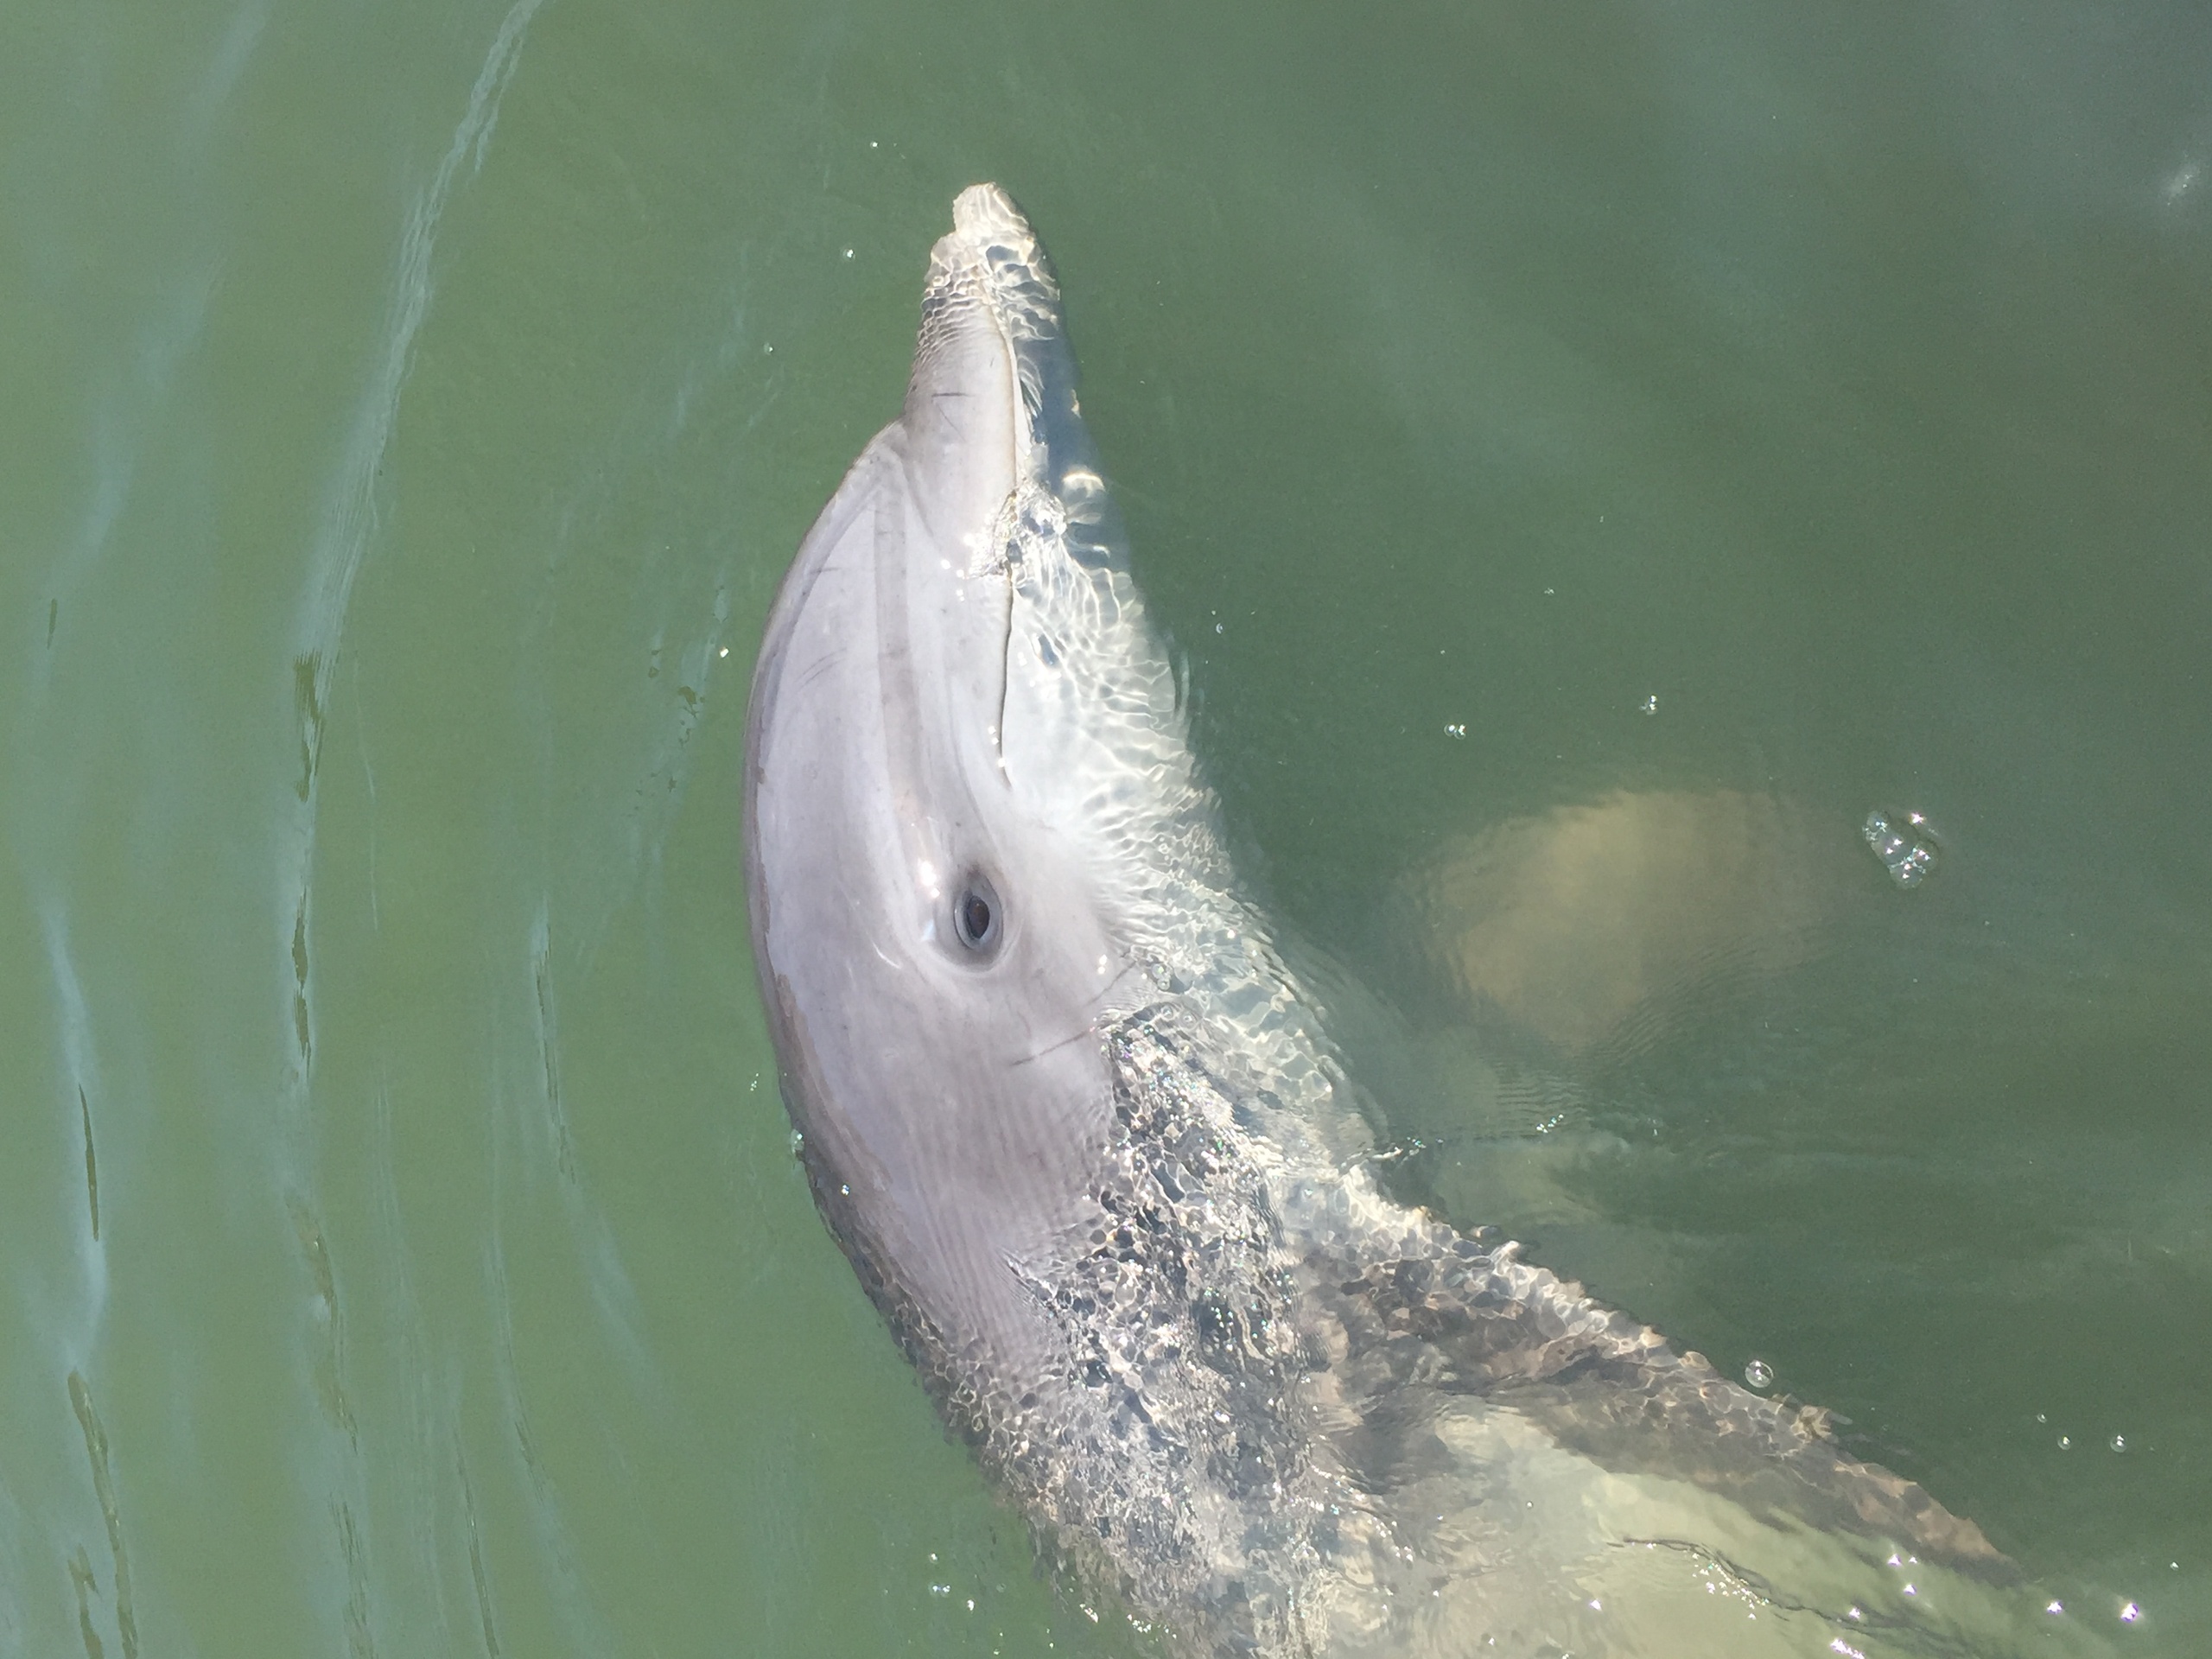 Disappearing Island and Dolphin Tour in Hilton Head